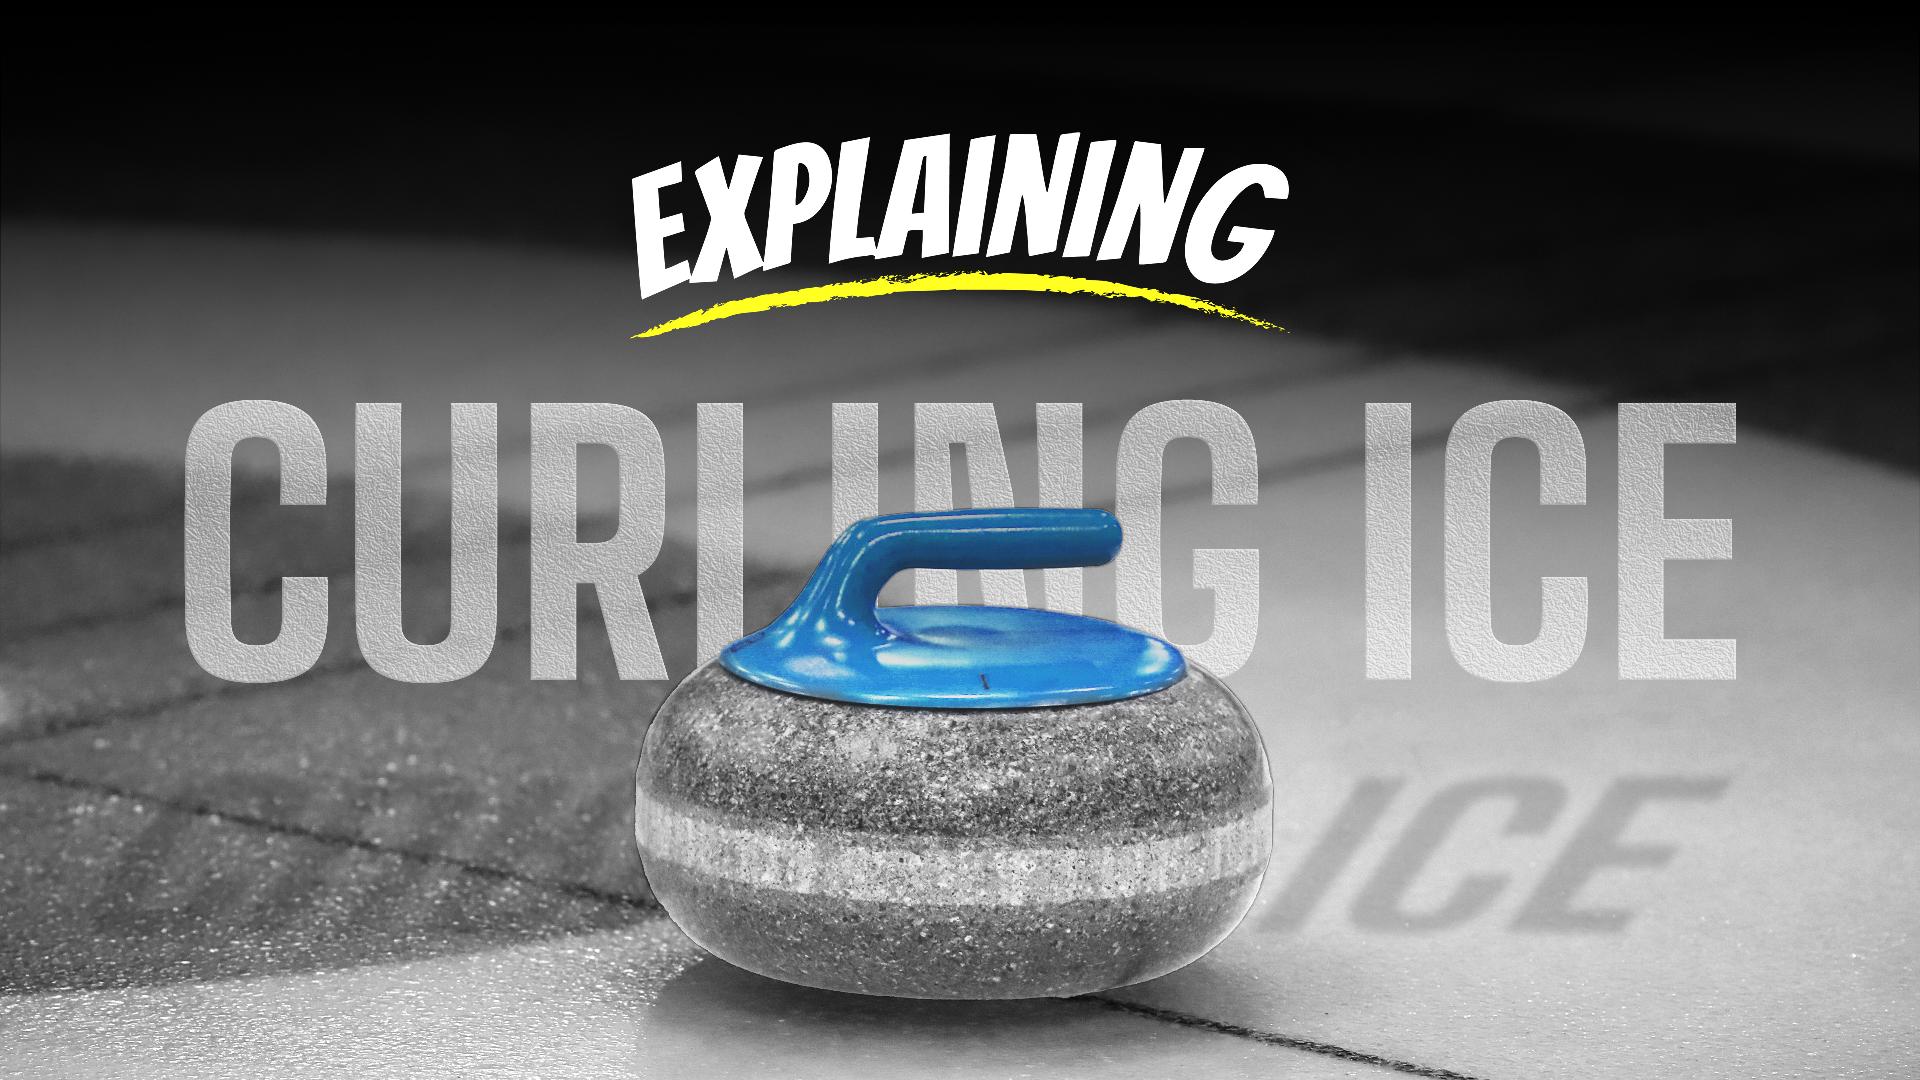 How is curling ice different from other ice?